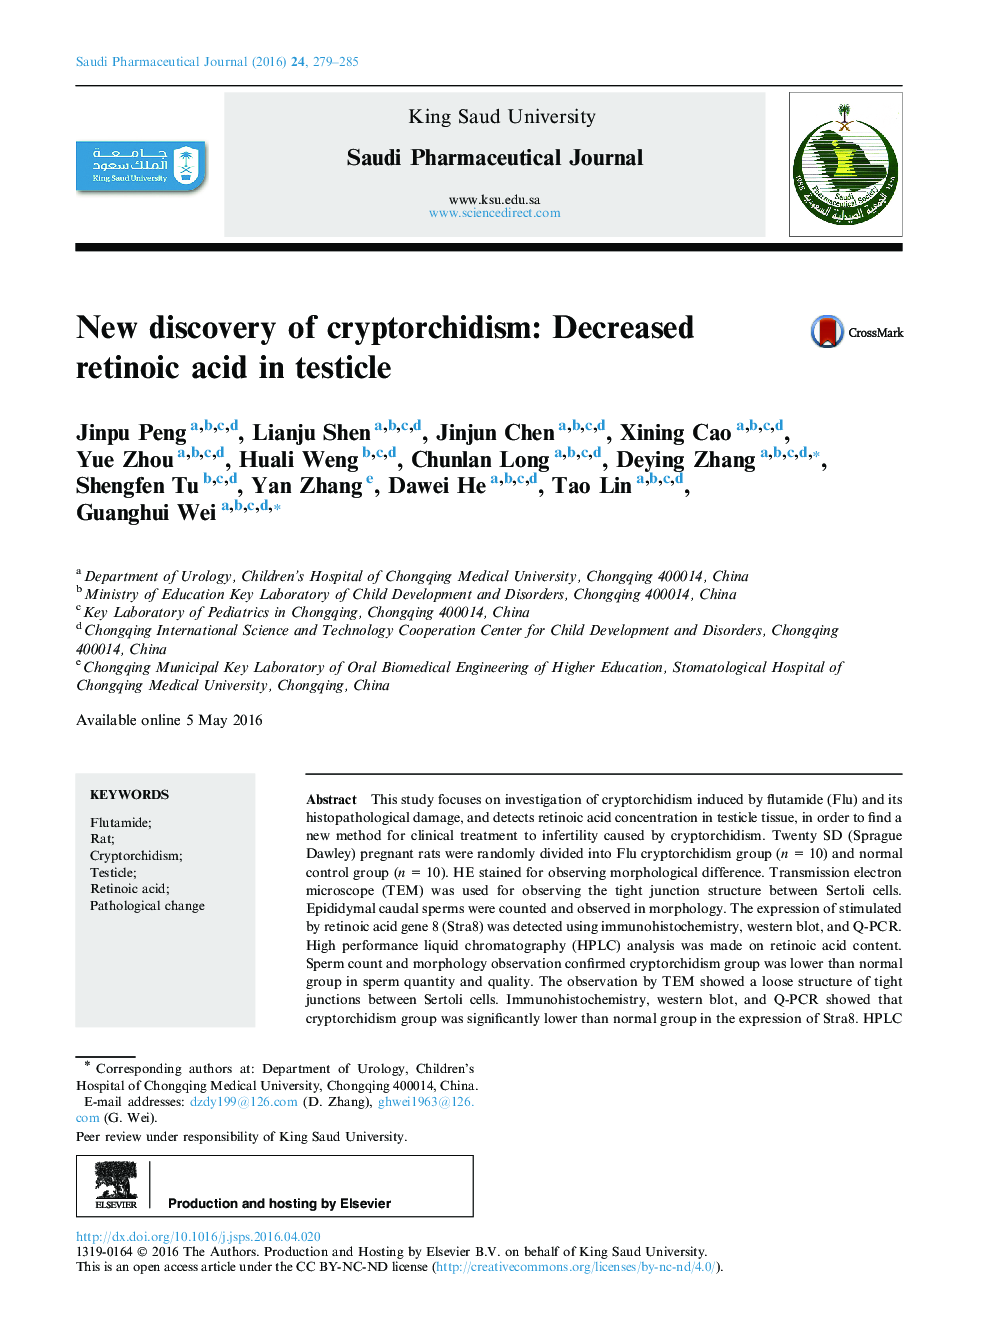 New discovery of cryptorchidism: Decreased retinoic acid in testicle 